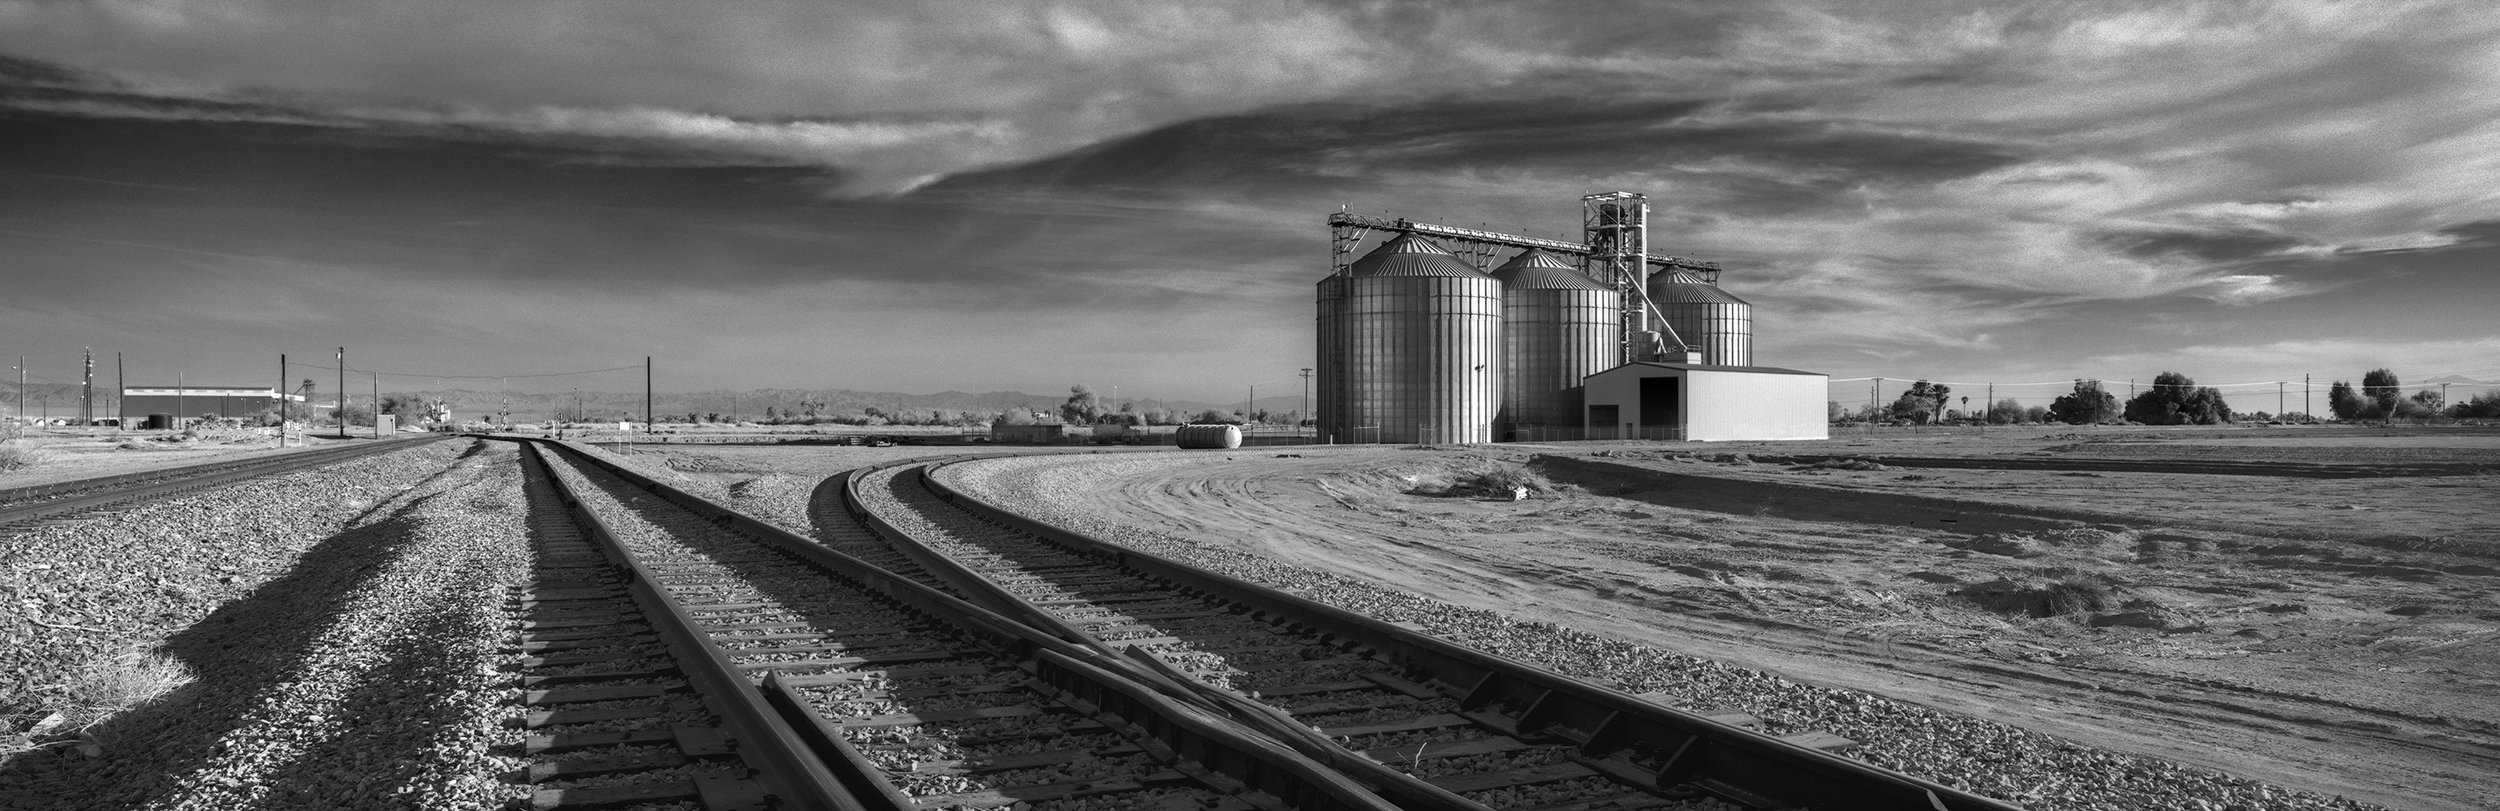  Imperial Valley. February 17, 2014 